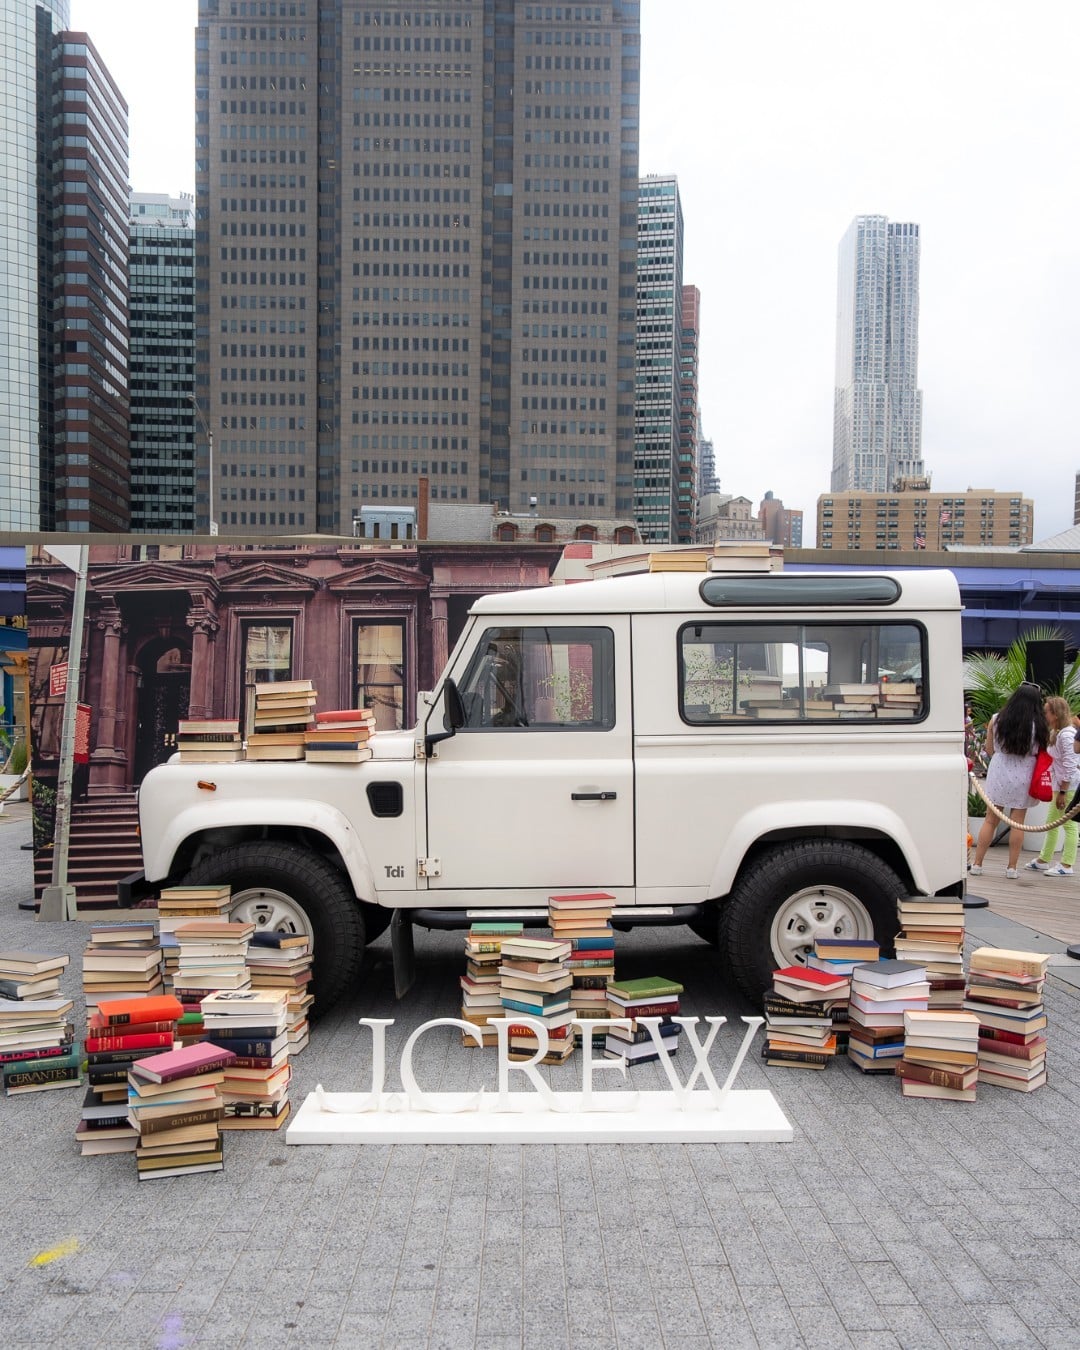 That’s a wrap on NYC Fashion Week 2023. Flashing back to an epic activation on #TheSeaport Square by @jcrew to celebrate 40 years of J.Crew.